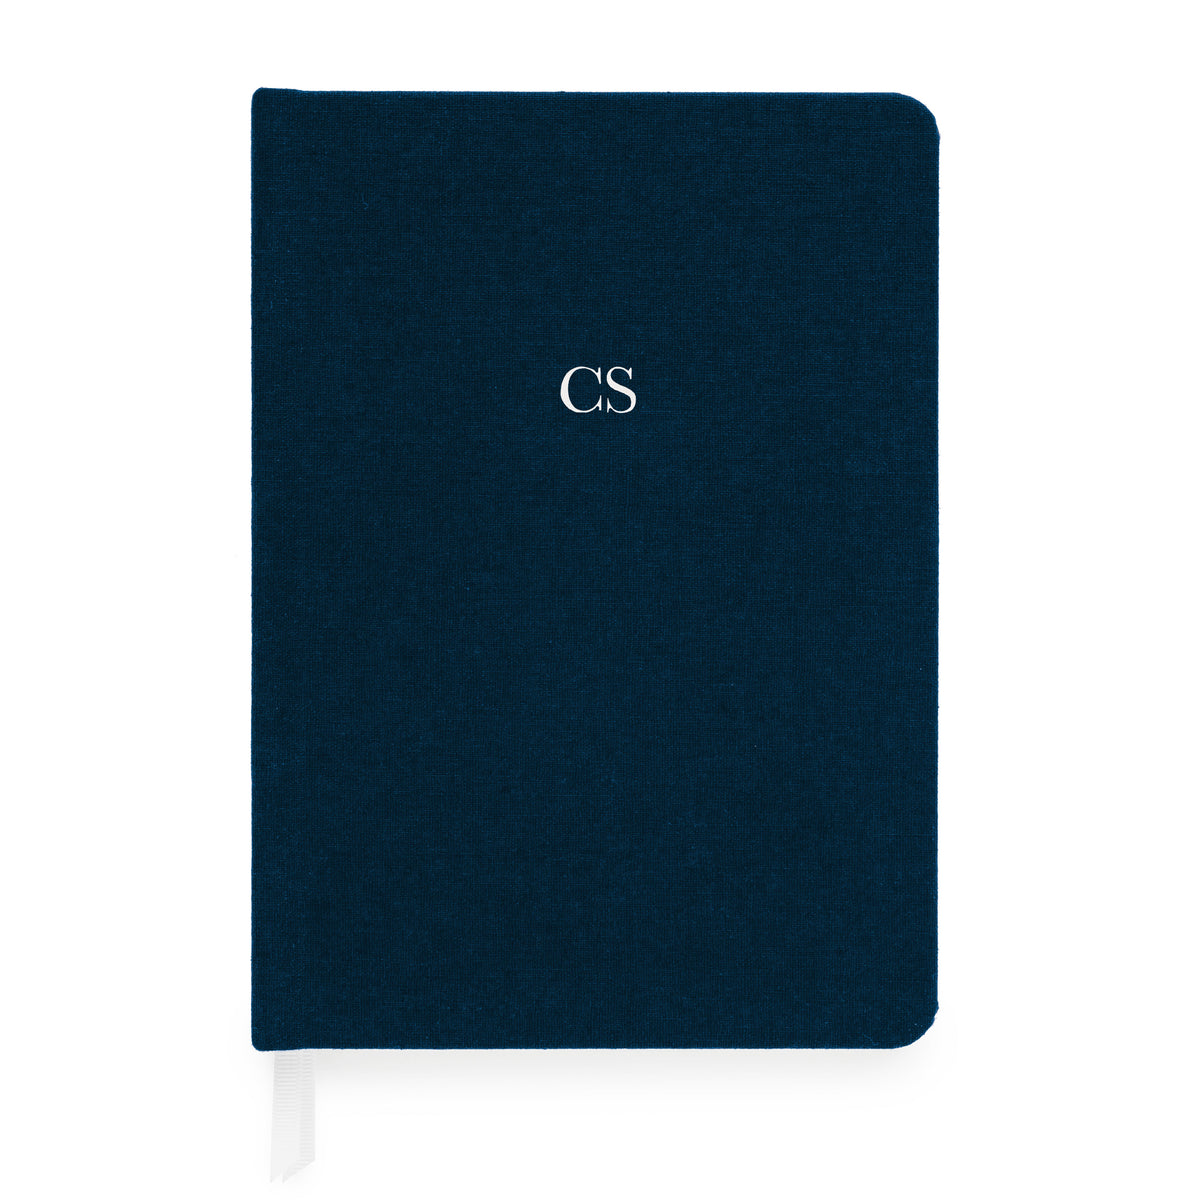 tailored navy journal with white foil monogram